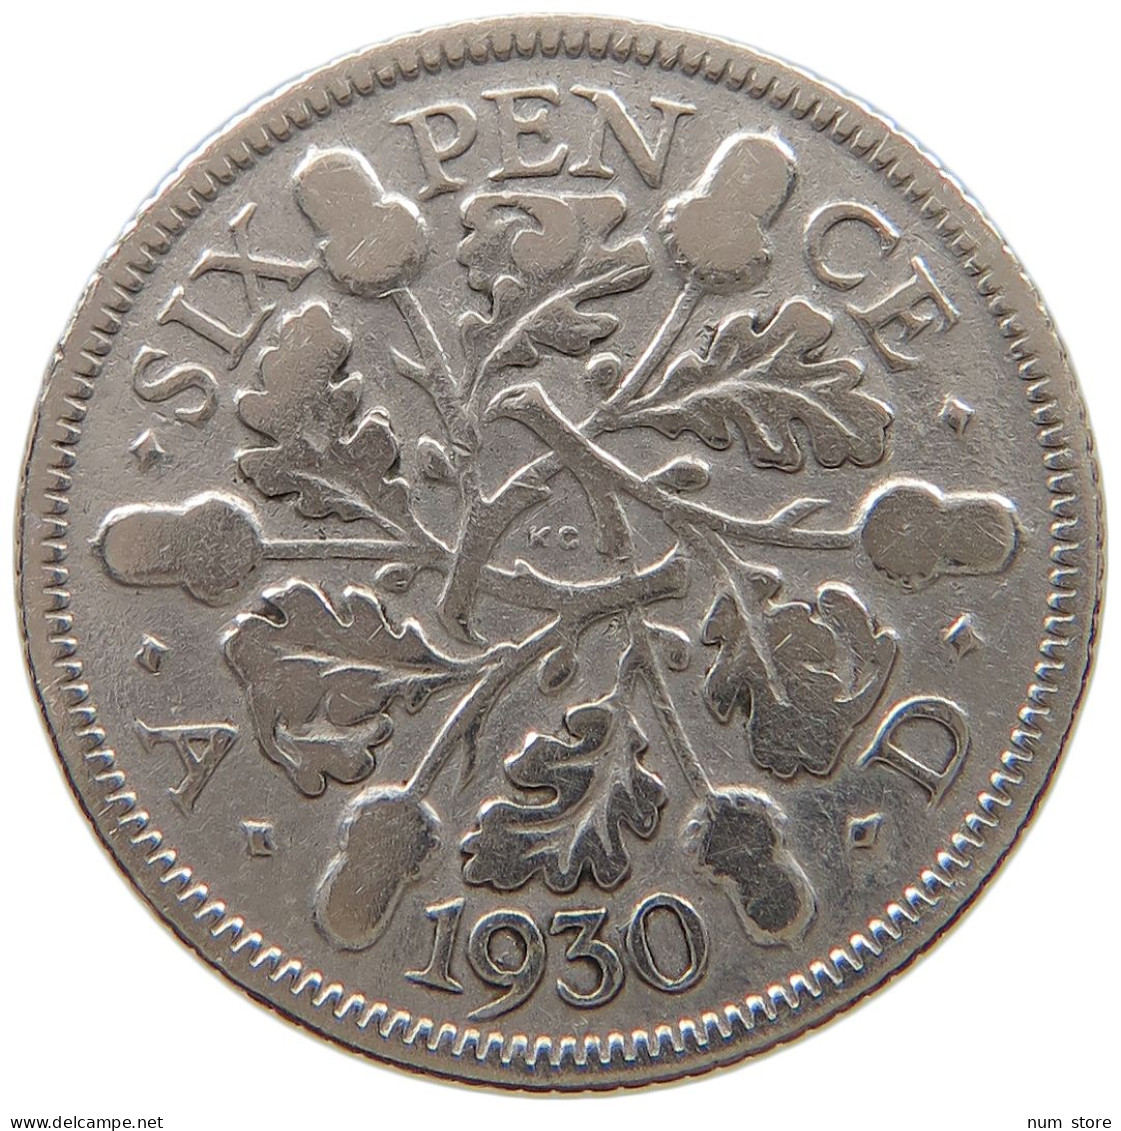 GREAT BRITAIN SIXPENCE 1930 #a057 0271 - H. 6 Pence